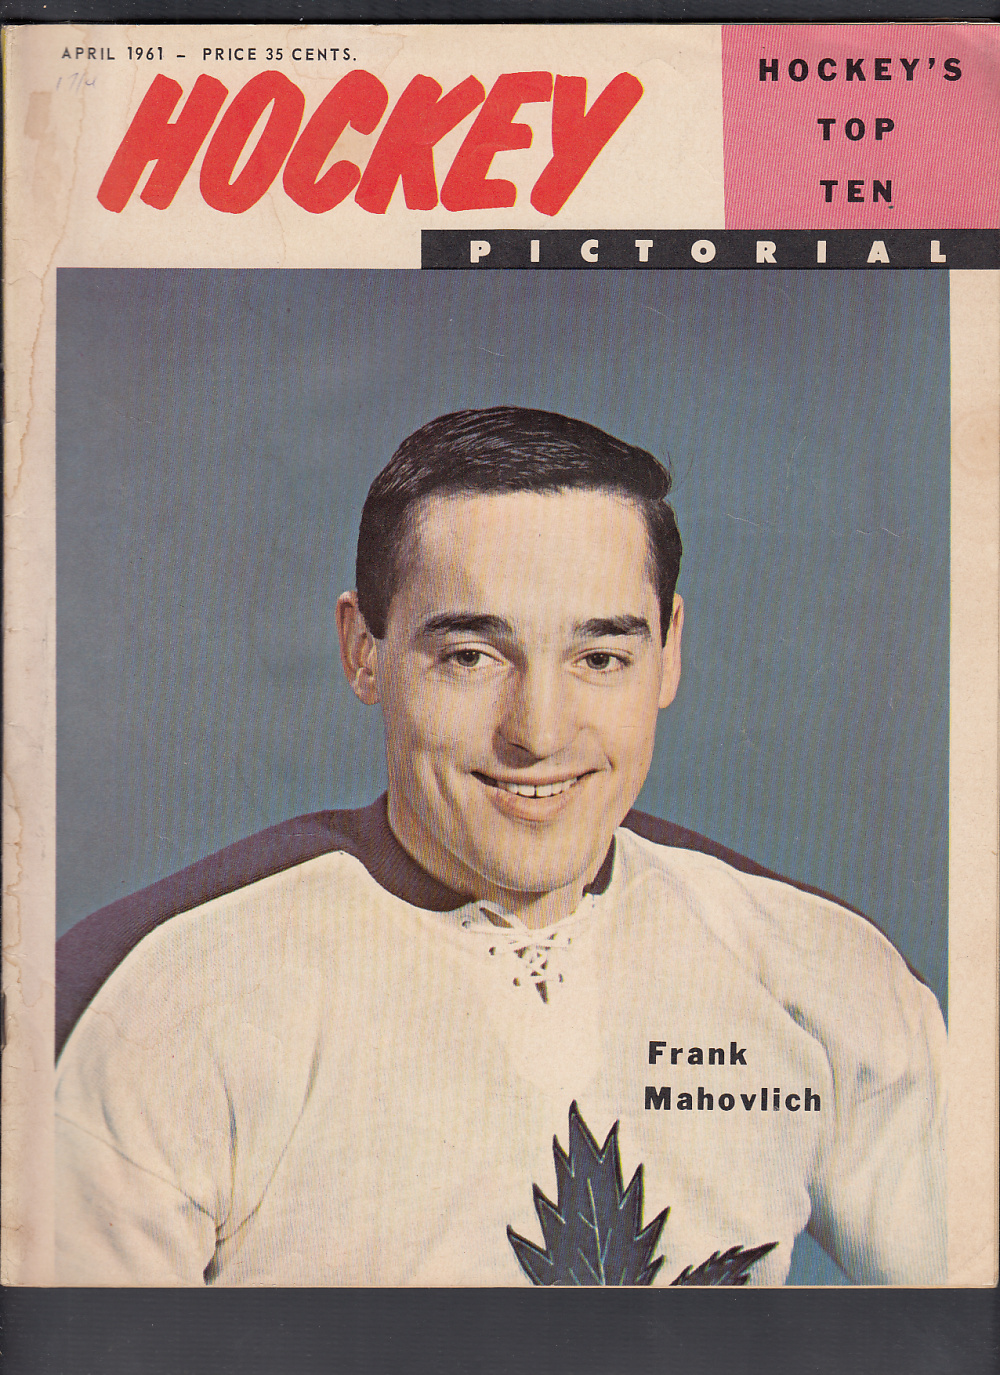 1961 HOCKEY PICTORIAL MAGAZINE F. MAHOVLICH ON COVER photo